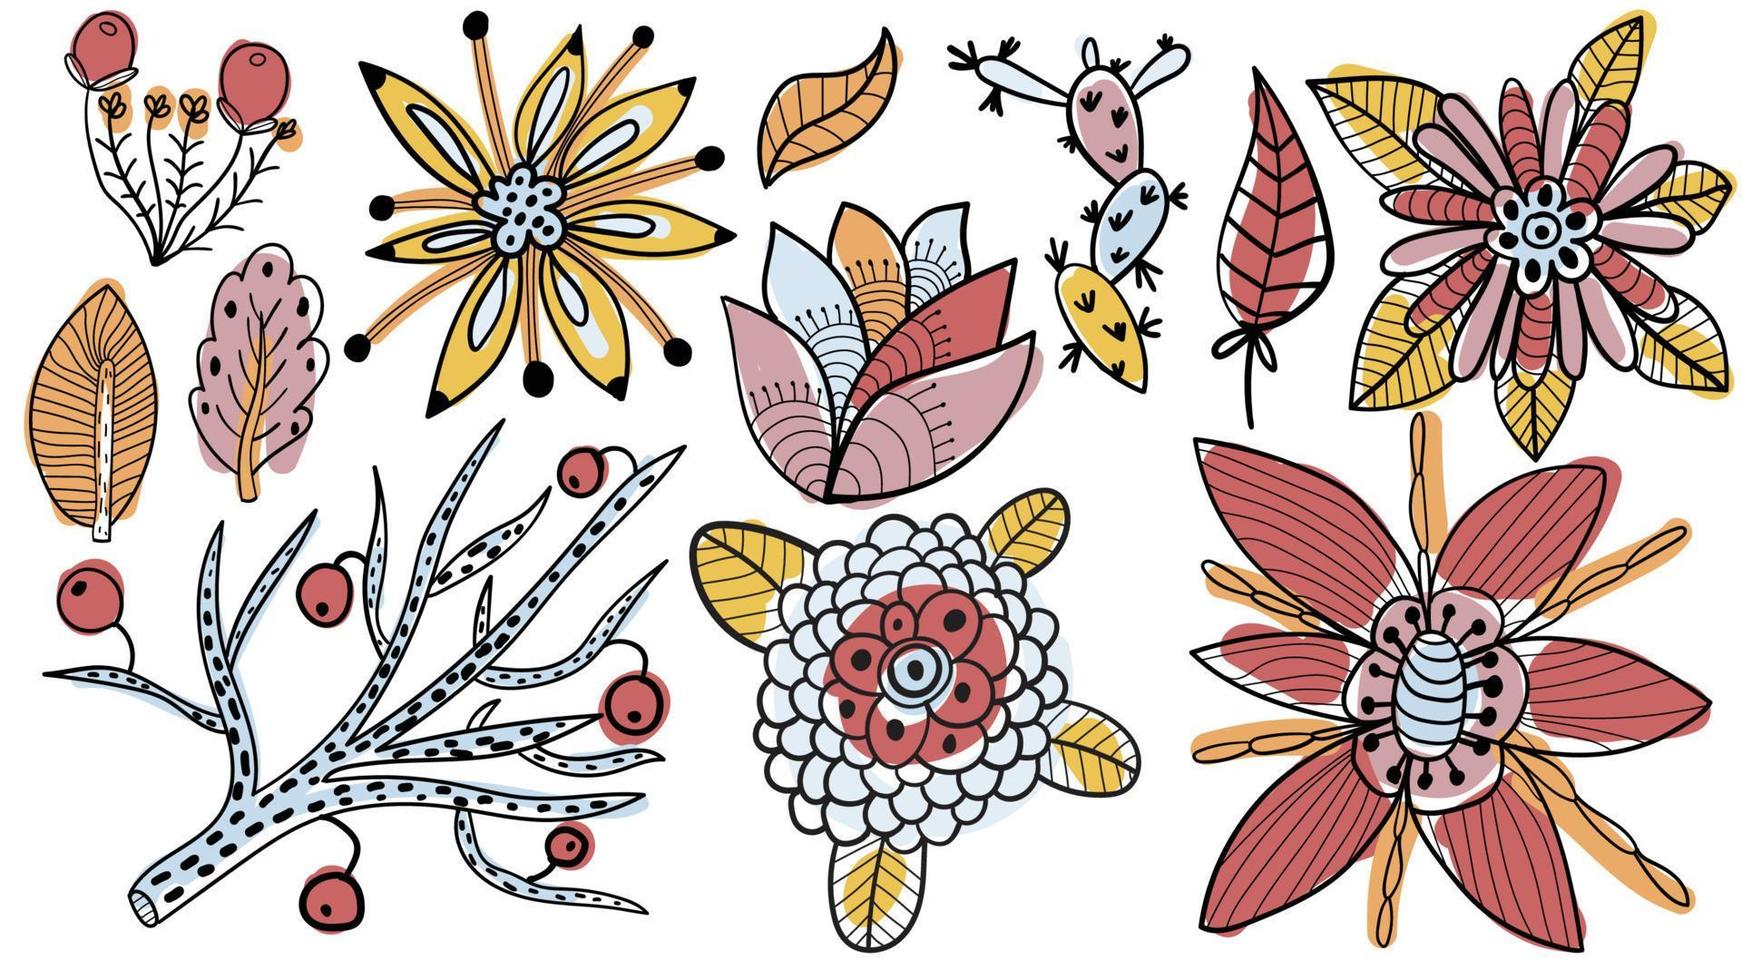 Cute hand drawn doodle collection of floral elements. Set of fantasy freehand flowers, leaves, petals, branch with berries isolated on white background. vector